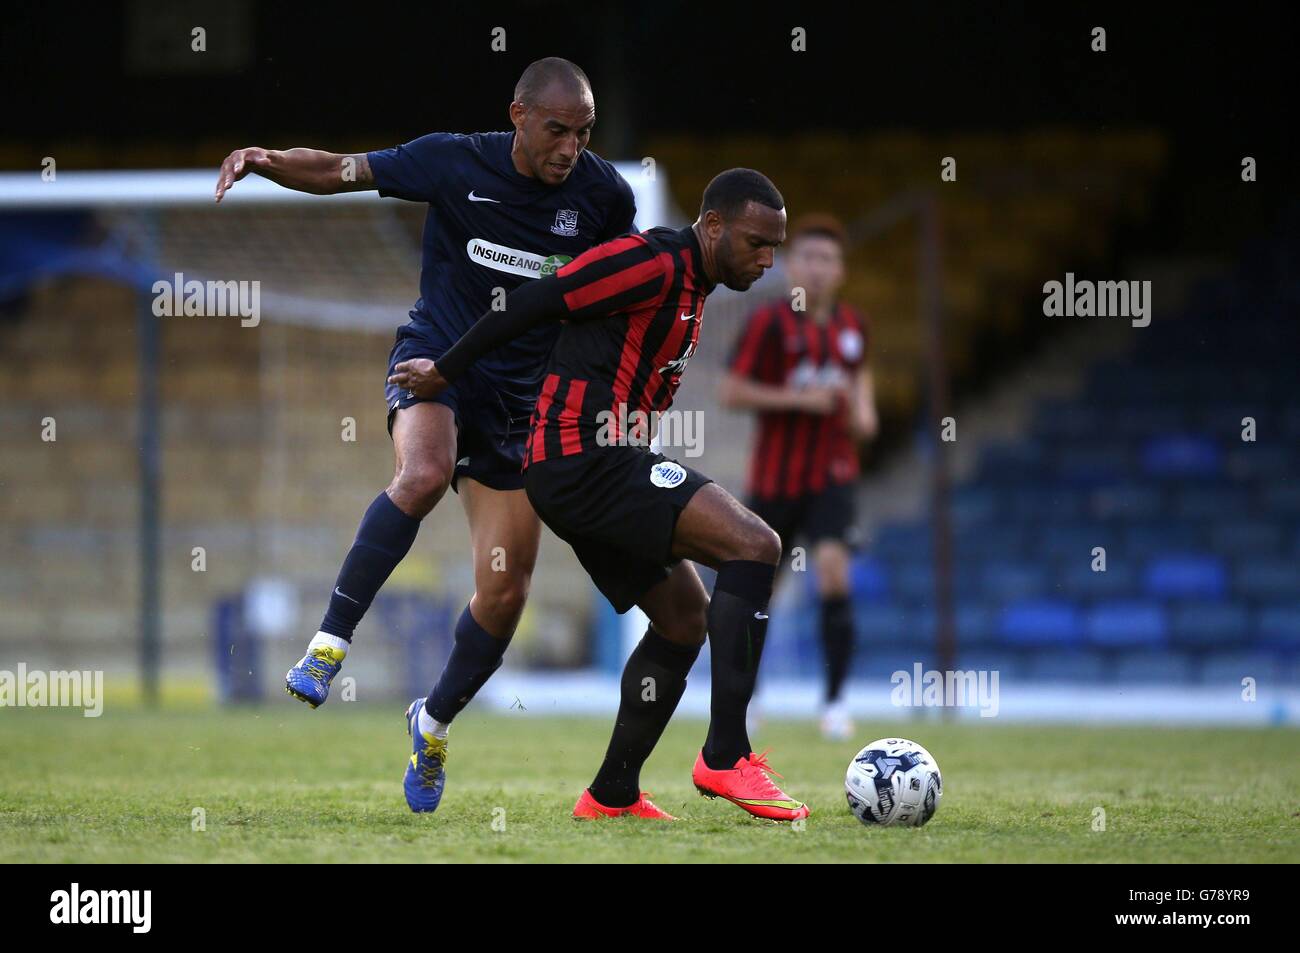 Southend United's Craig Fagan, (left) battles for possession of the ball with Queens Park Rangers' Matt Phillips during the pre-season friendly at Roots Hall, Southend. Stock Photo